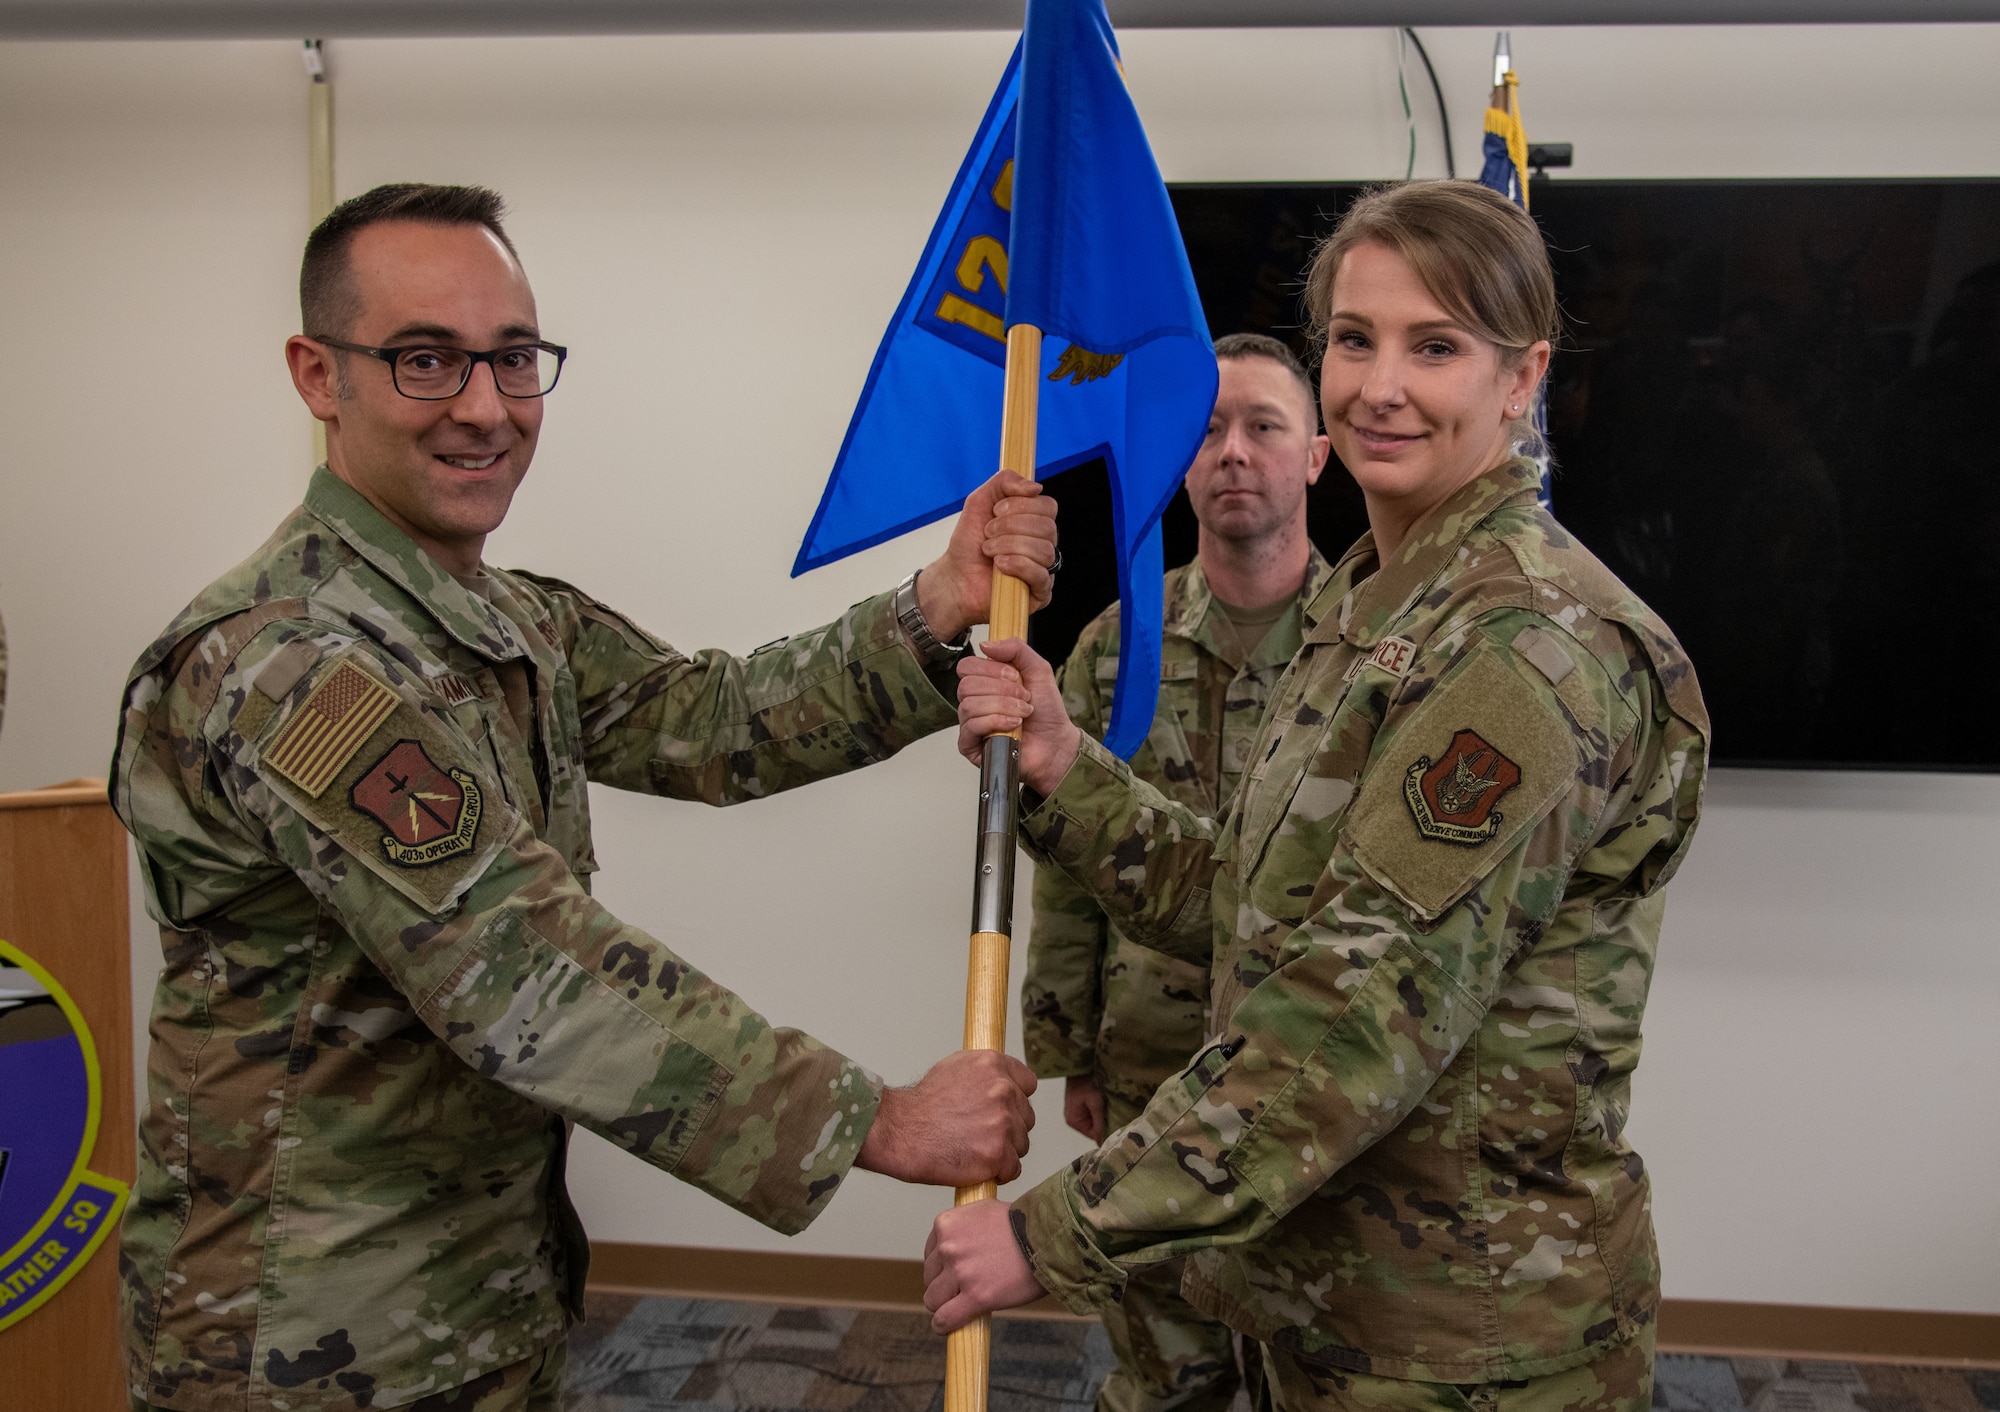 Col. Campanile and Lt. Col. Fennwald both hold the guidon as another Airman stands behind them